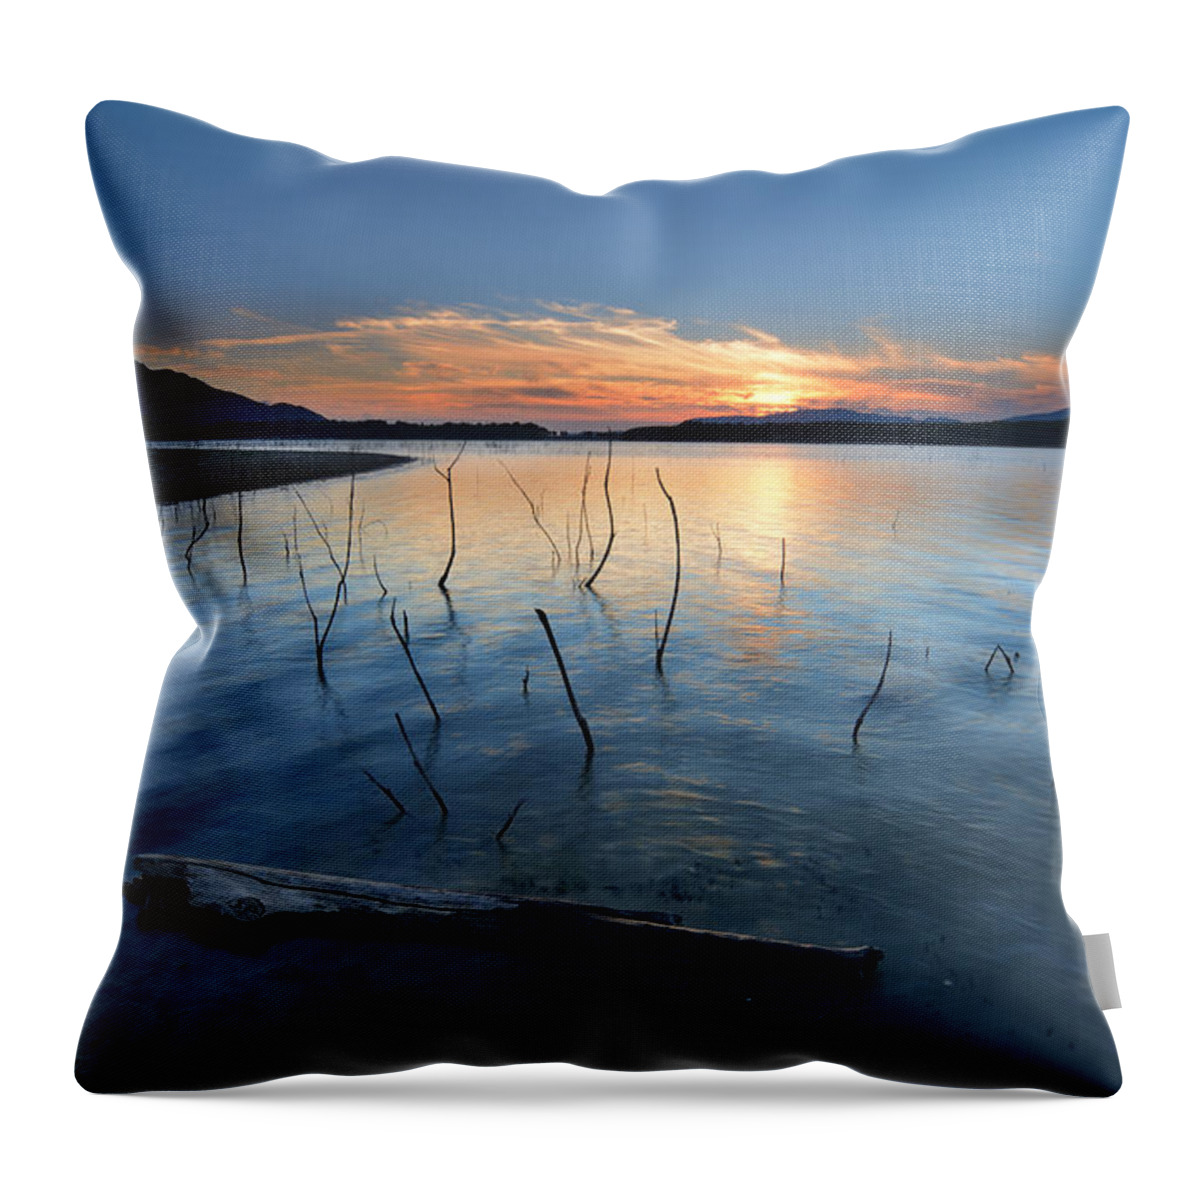  Water Throw Pillow featuring the photograph Summer sunset by Guido Montanes Castillo